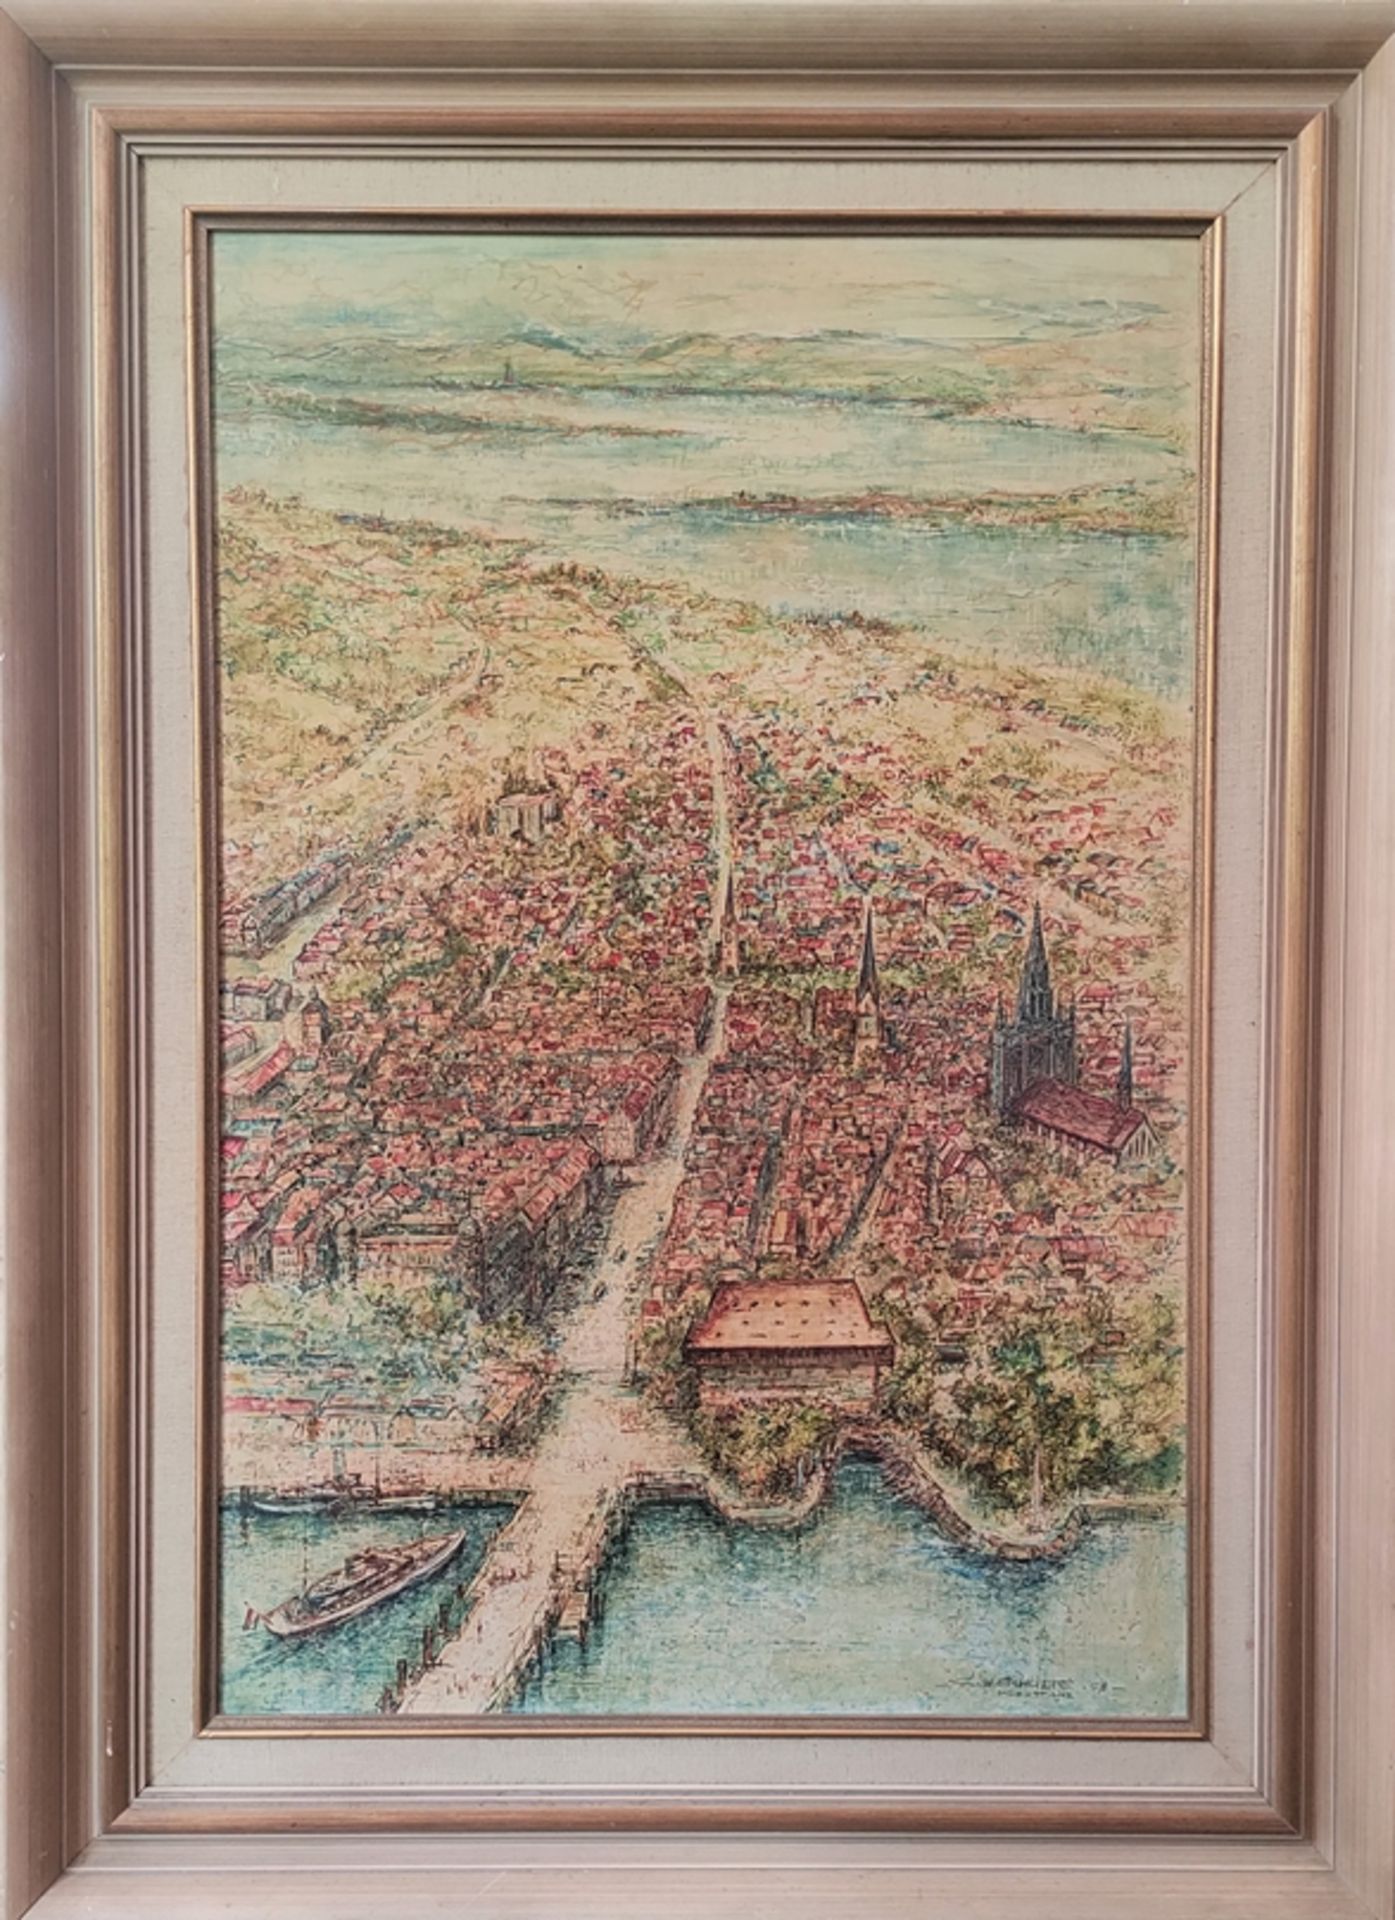 Schulte, C.W. (20th century) "Ansicht Konstanz", large bird's eye view of the city, mixed media on  - Image 2 of 3